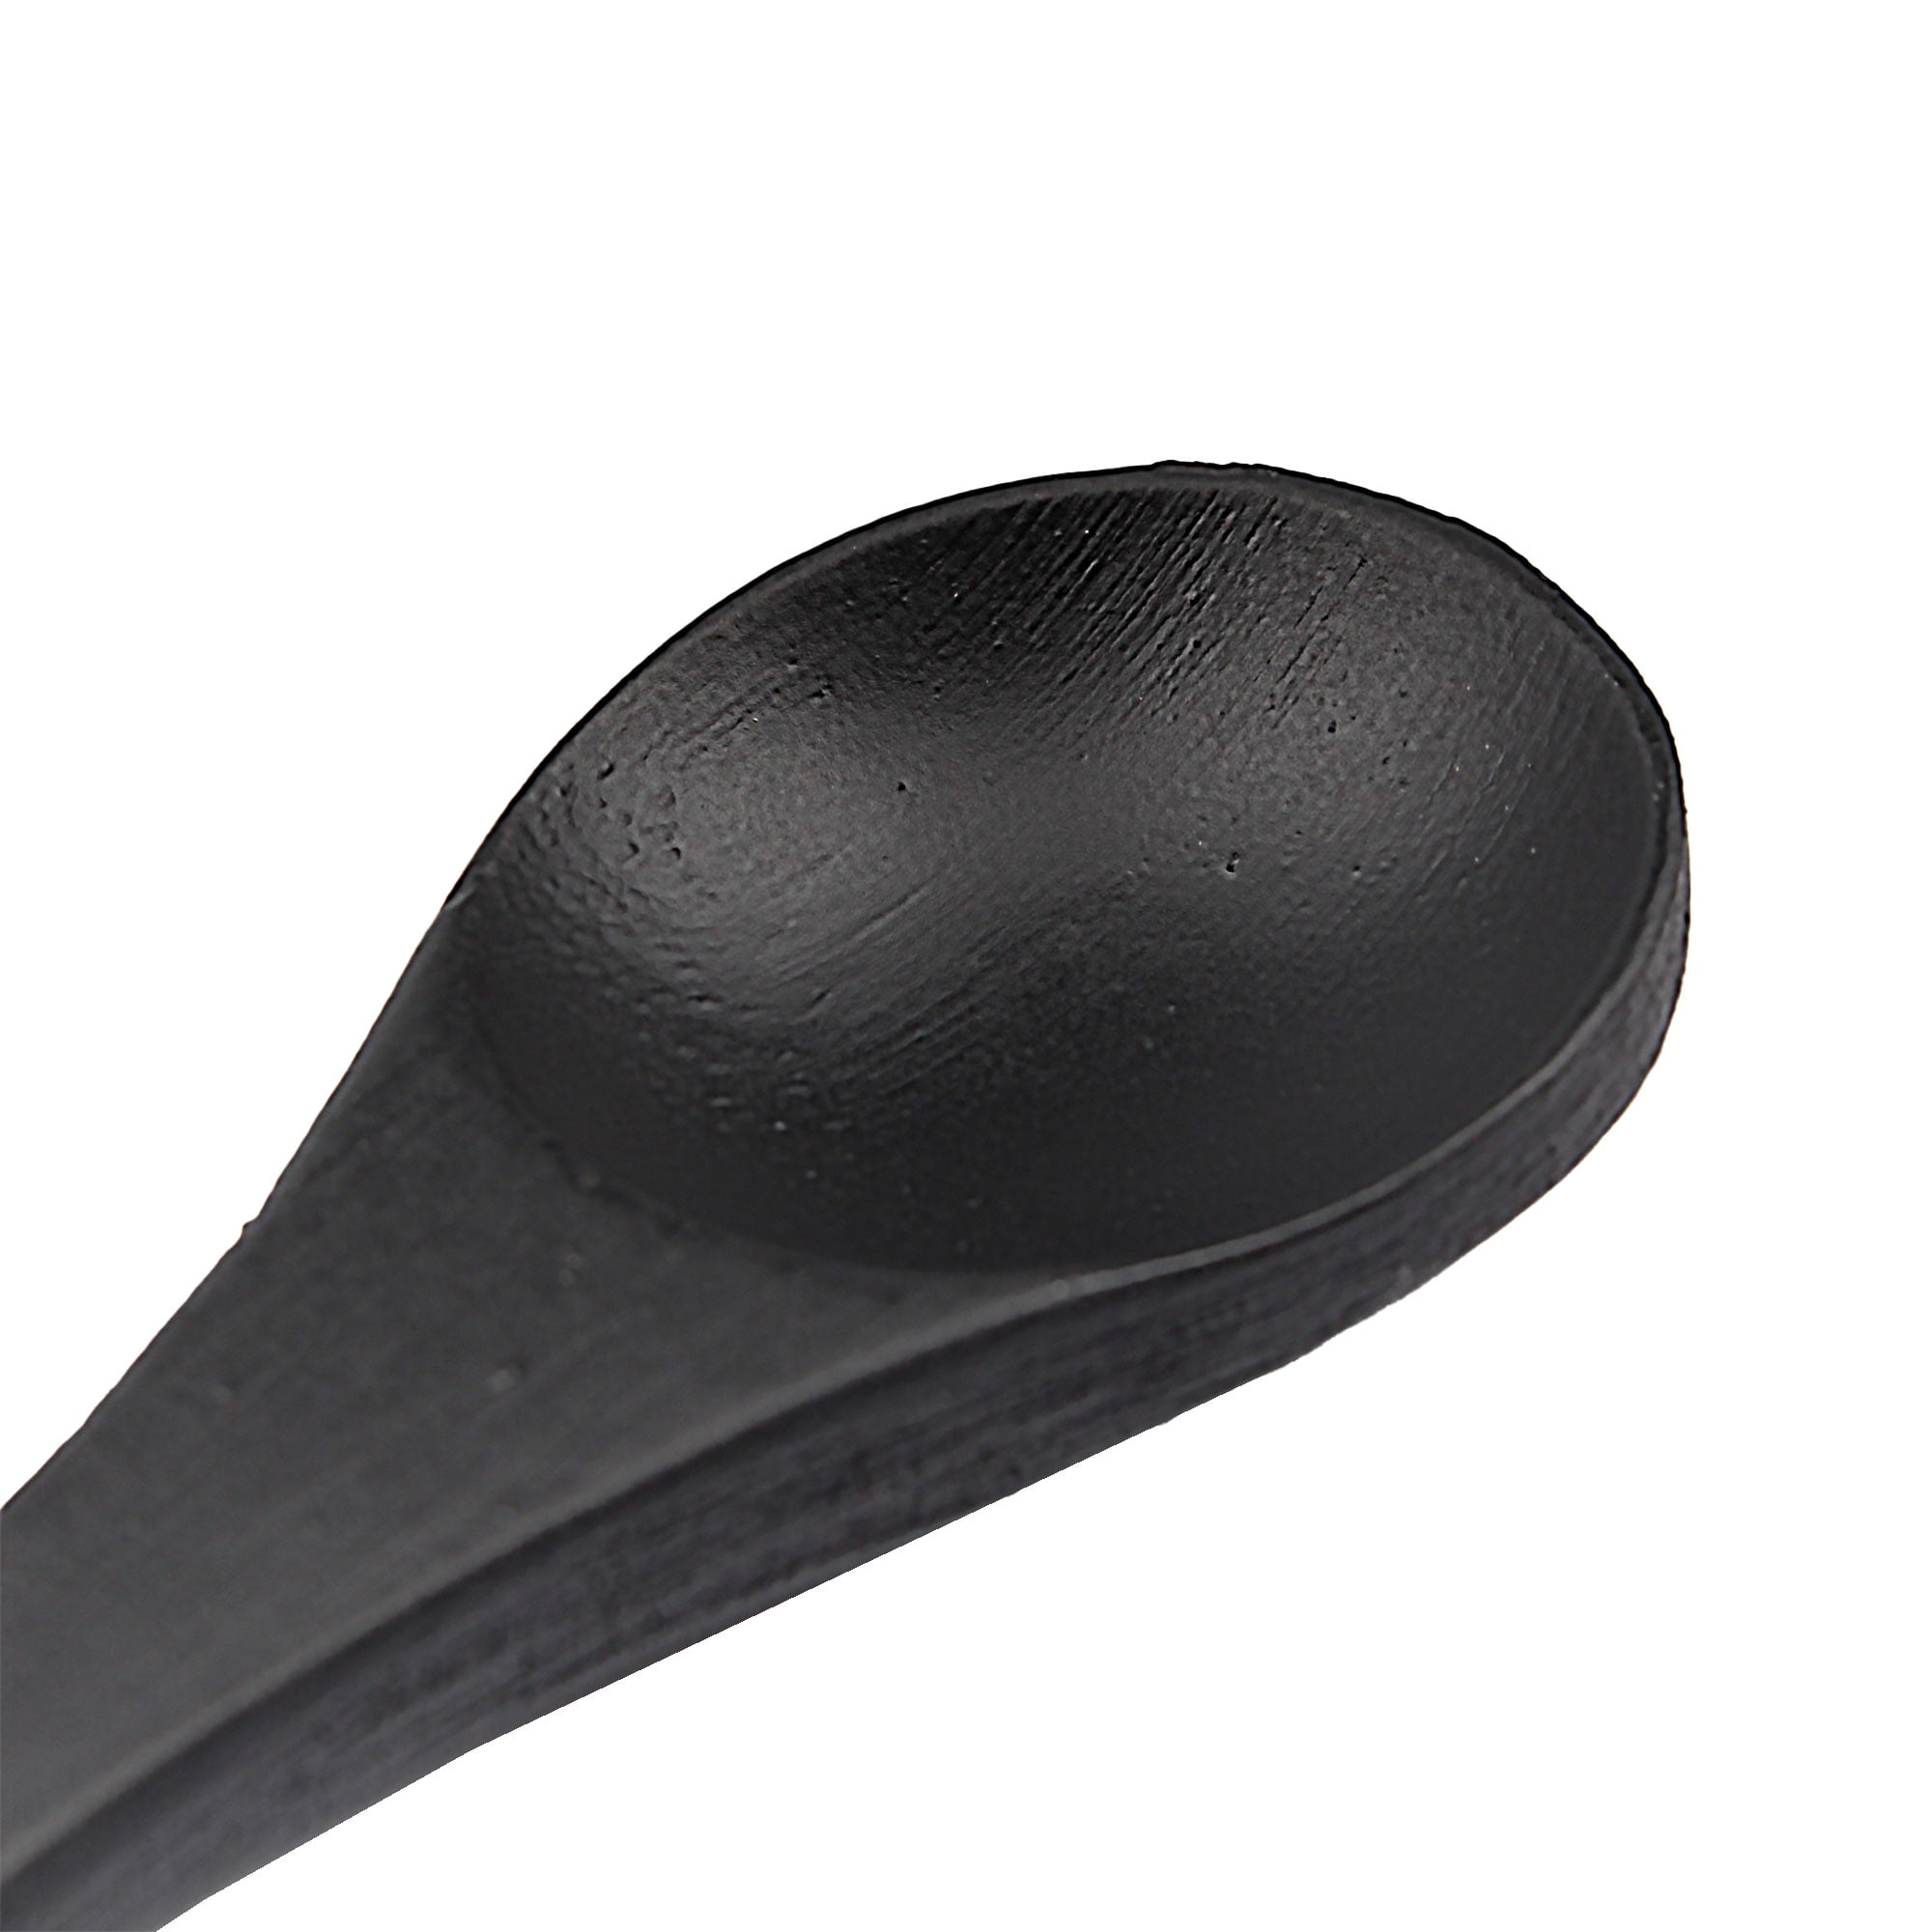 Small Bamboo Salt/Spice Spoon - Oval Head - Carbonized Brown